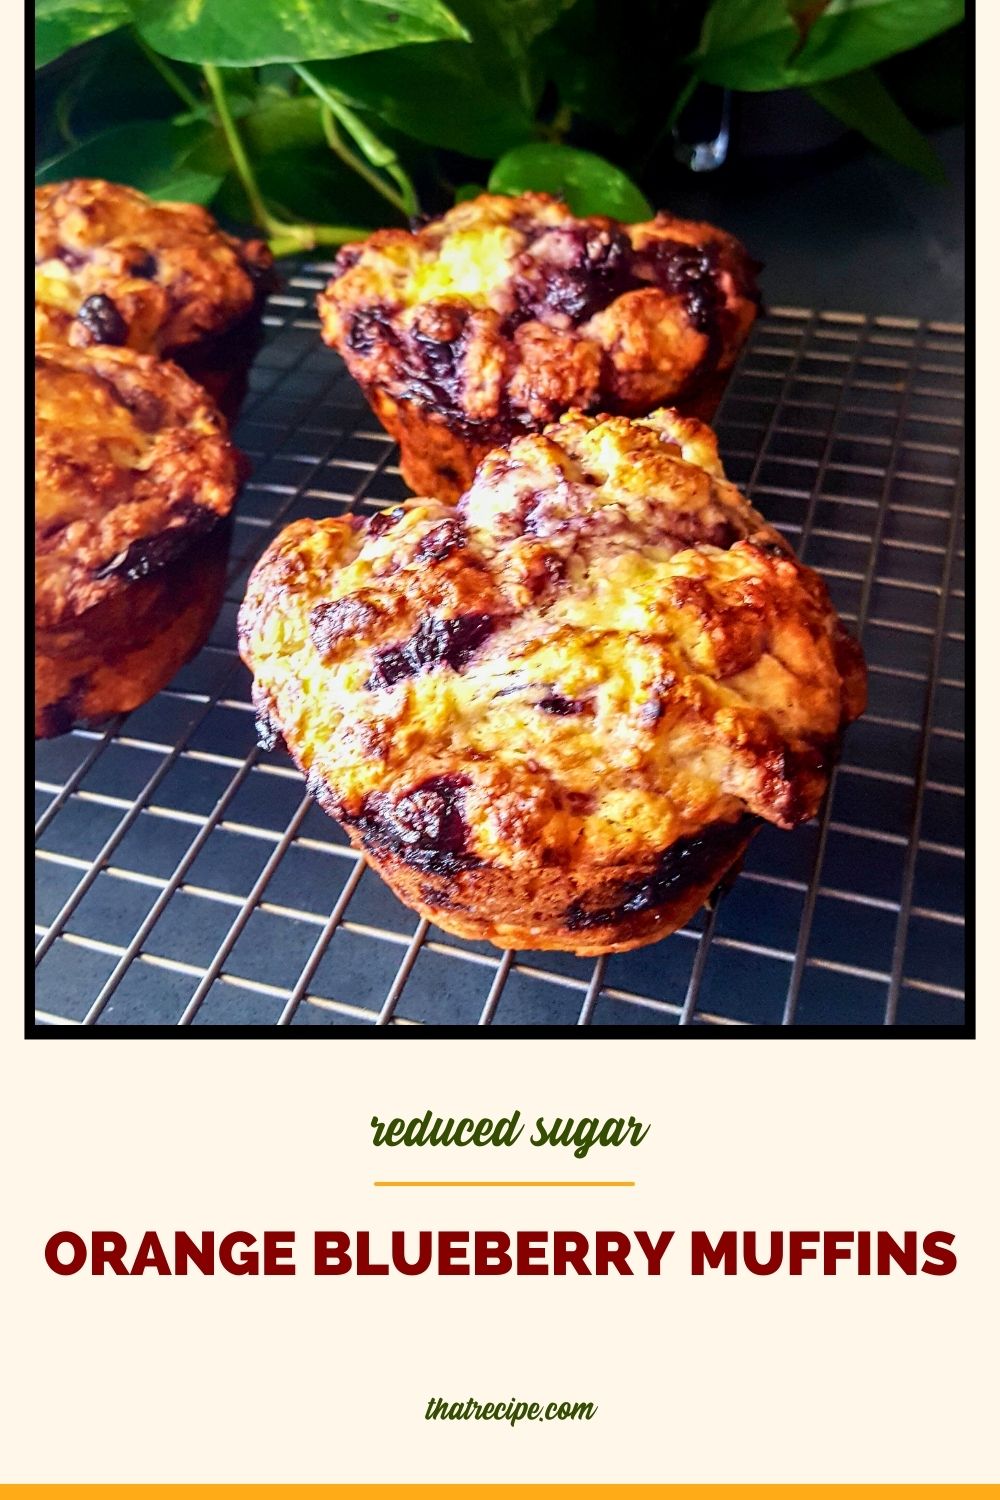 blueberry muffins on a rack with text overlay "orange blueberry muffin"